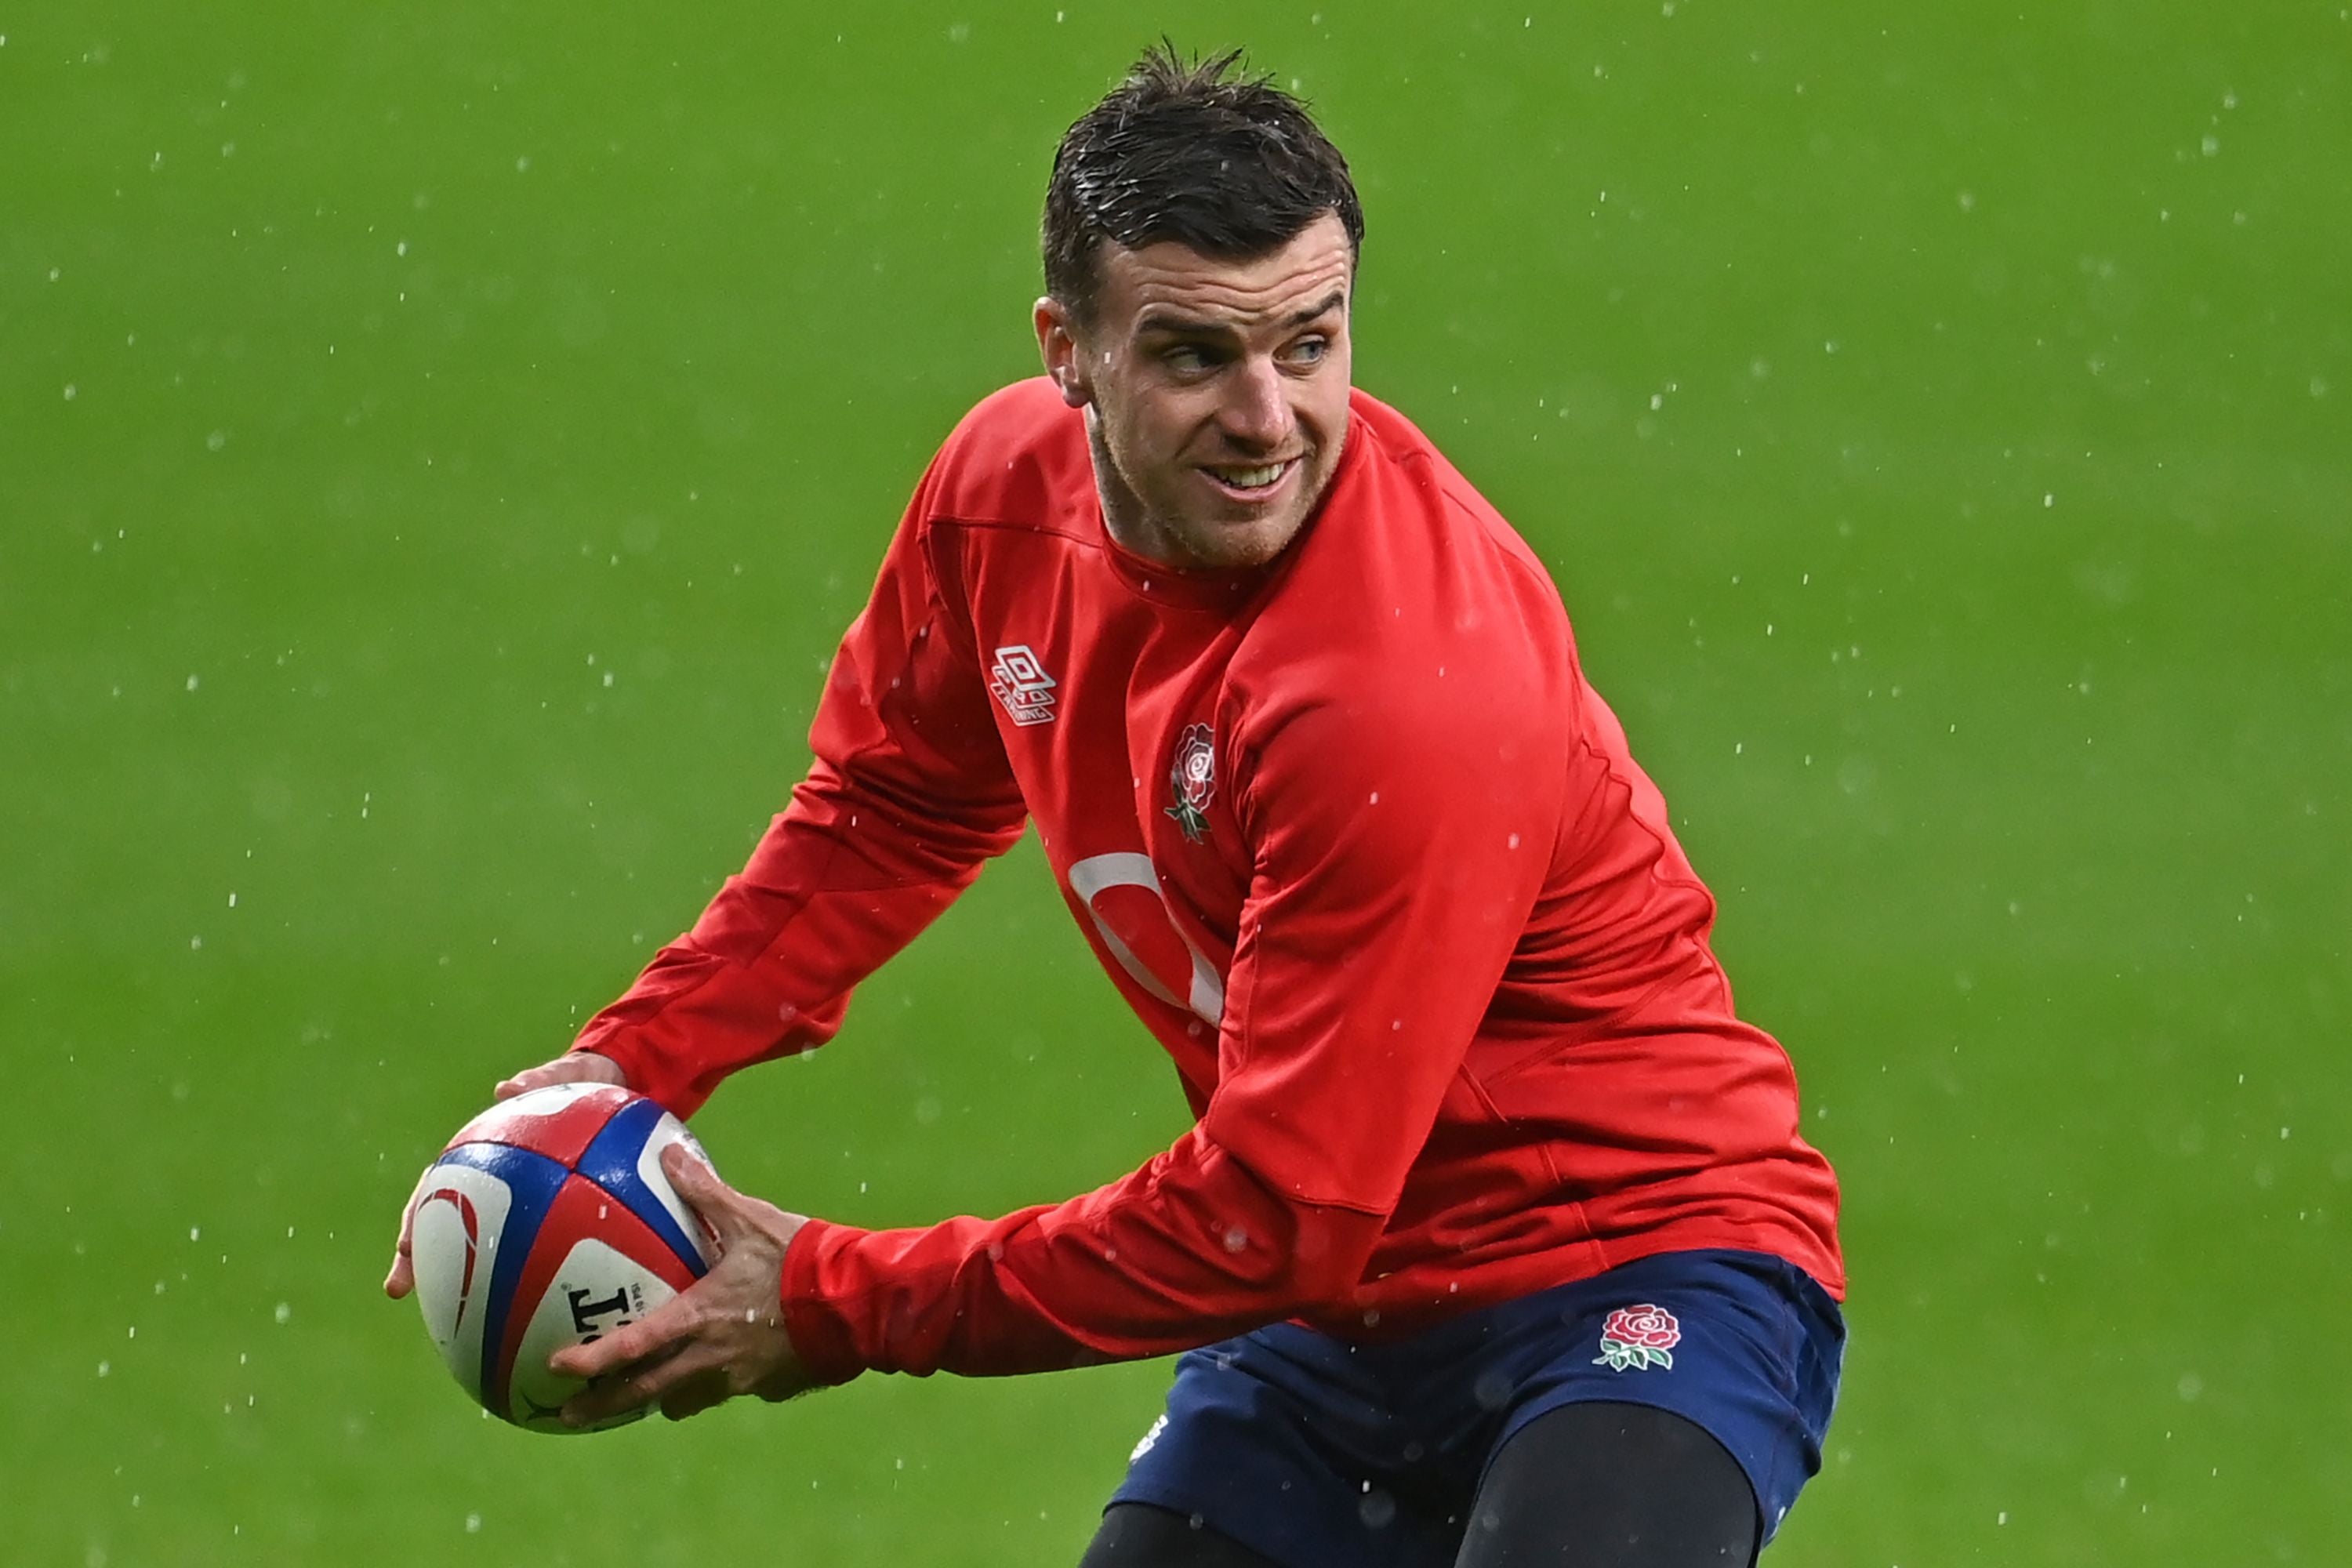 George Ford in training